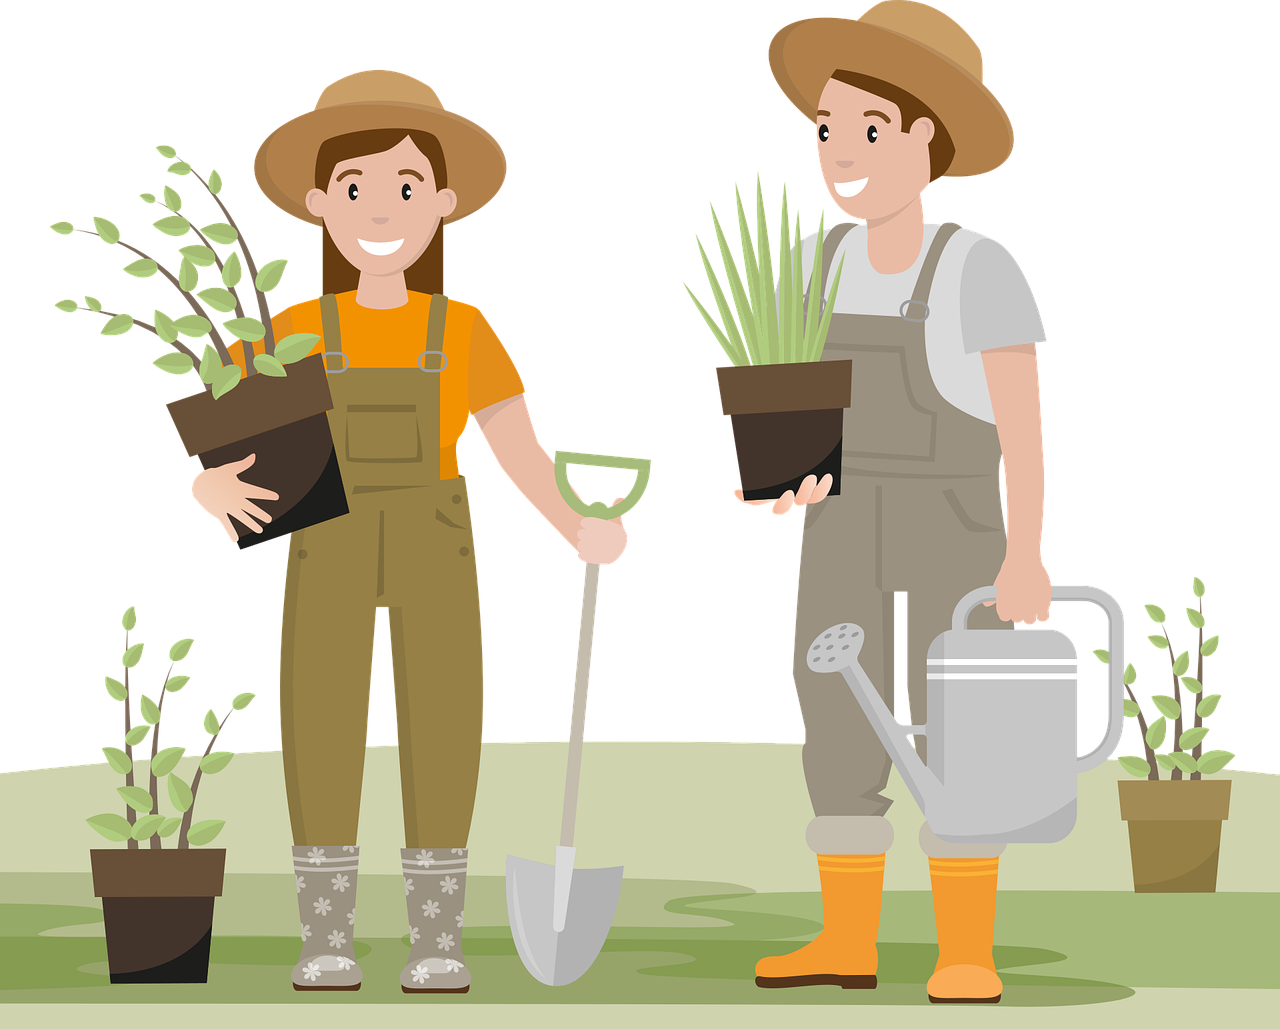 Gardening Injuries: Prevention and Safety Tips for a Healthy Garden Experience